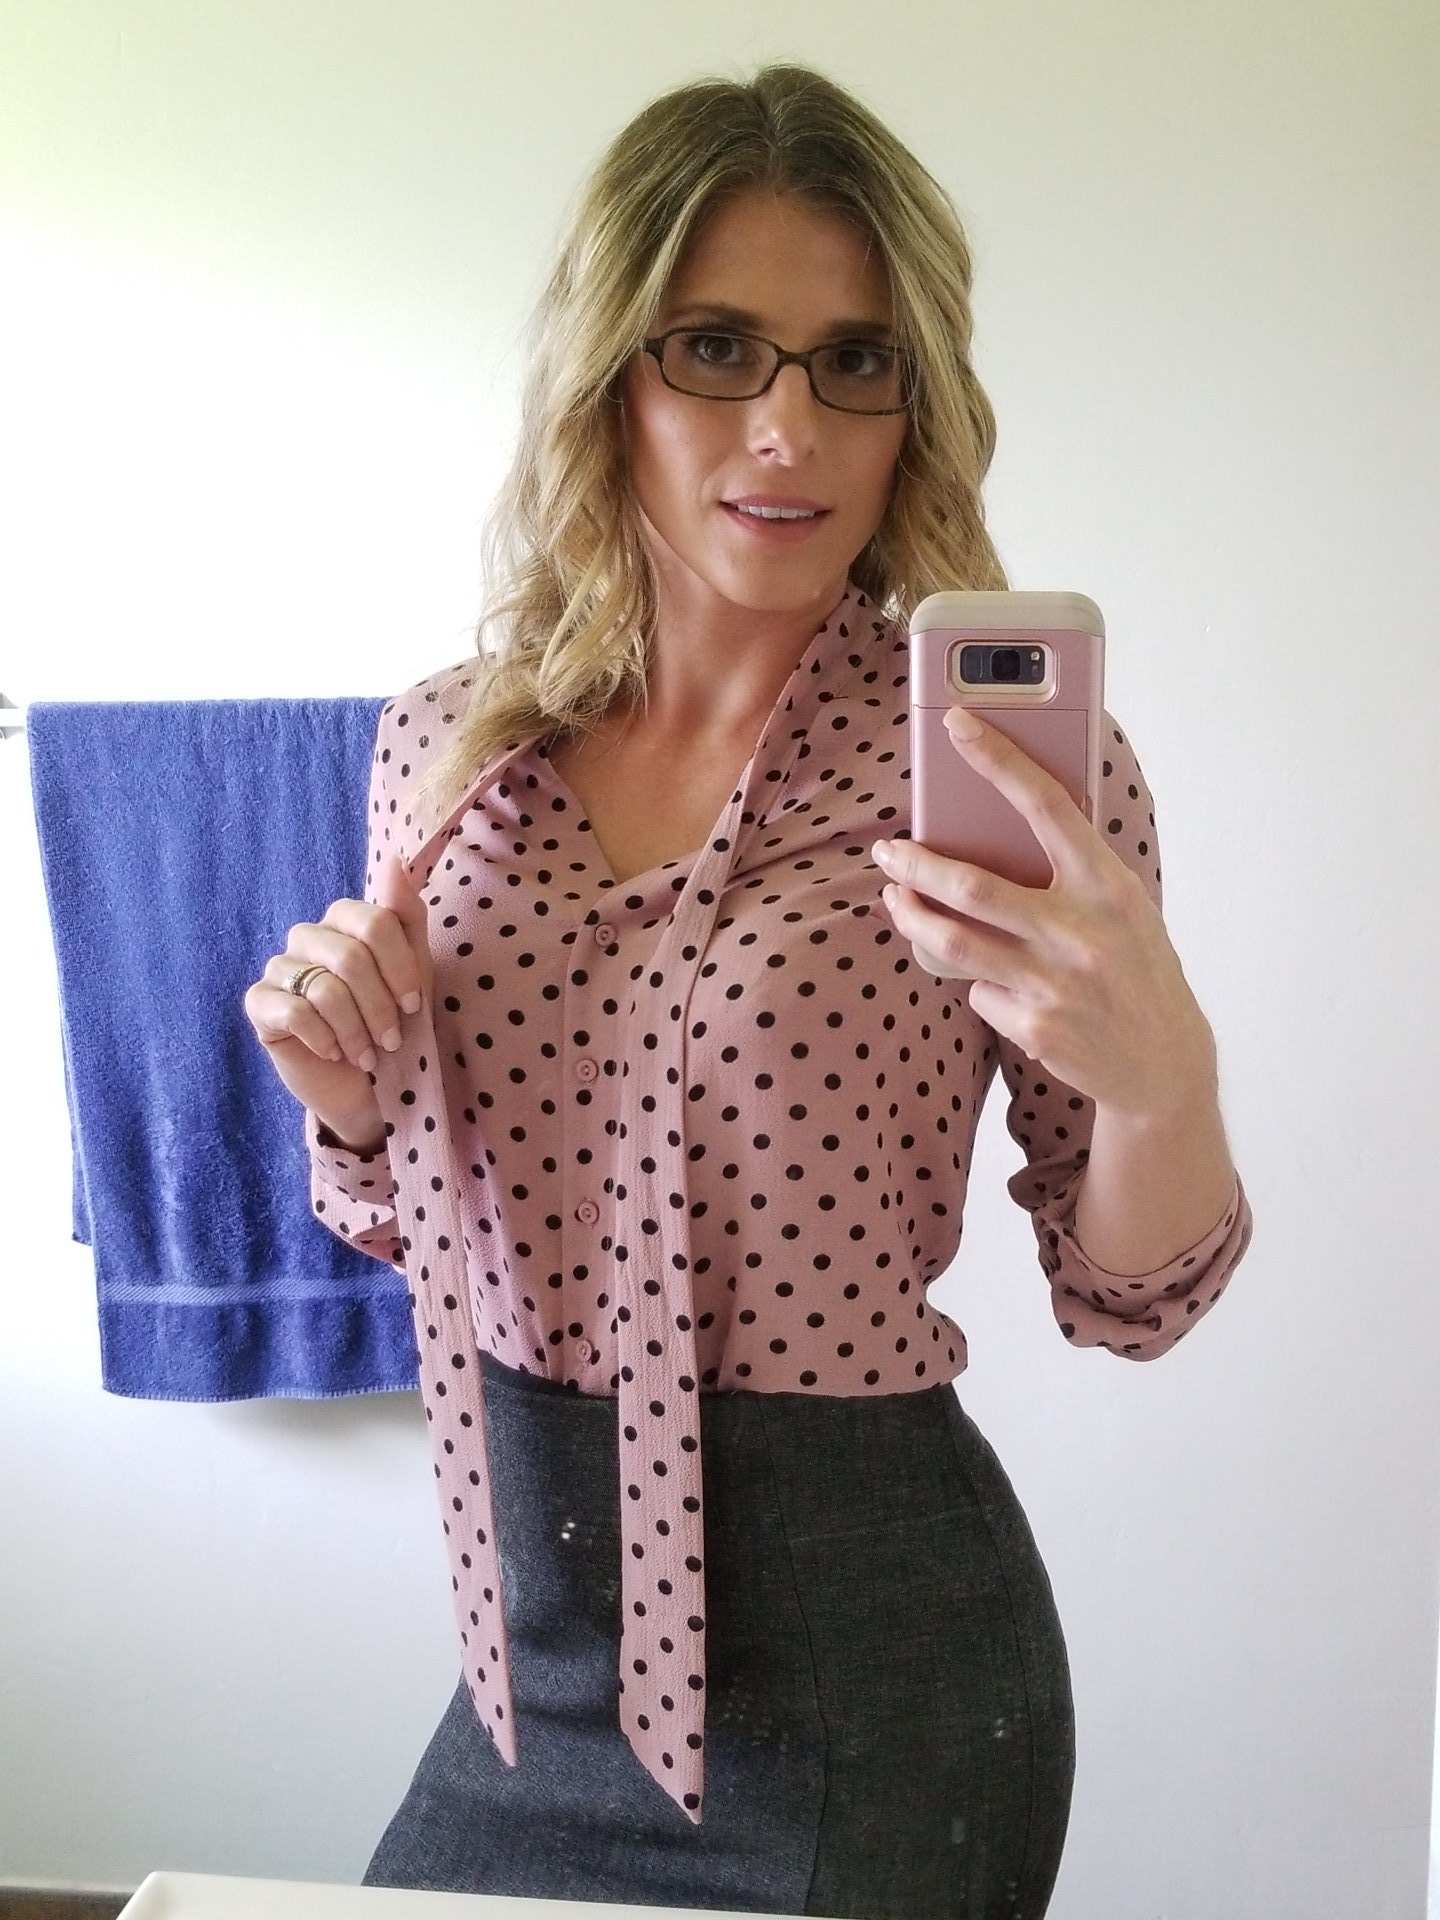 Cory Chase on Twitter.